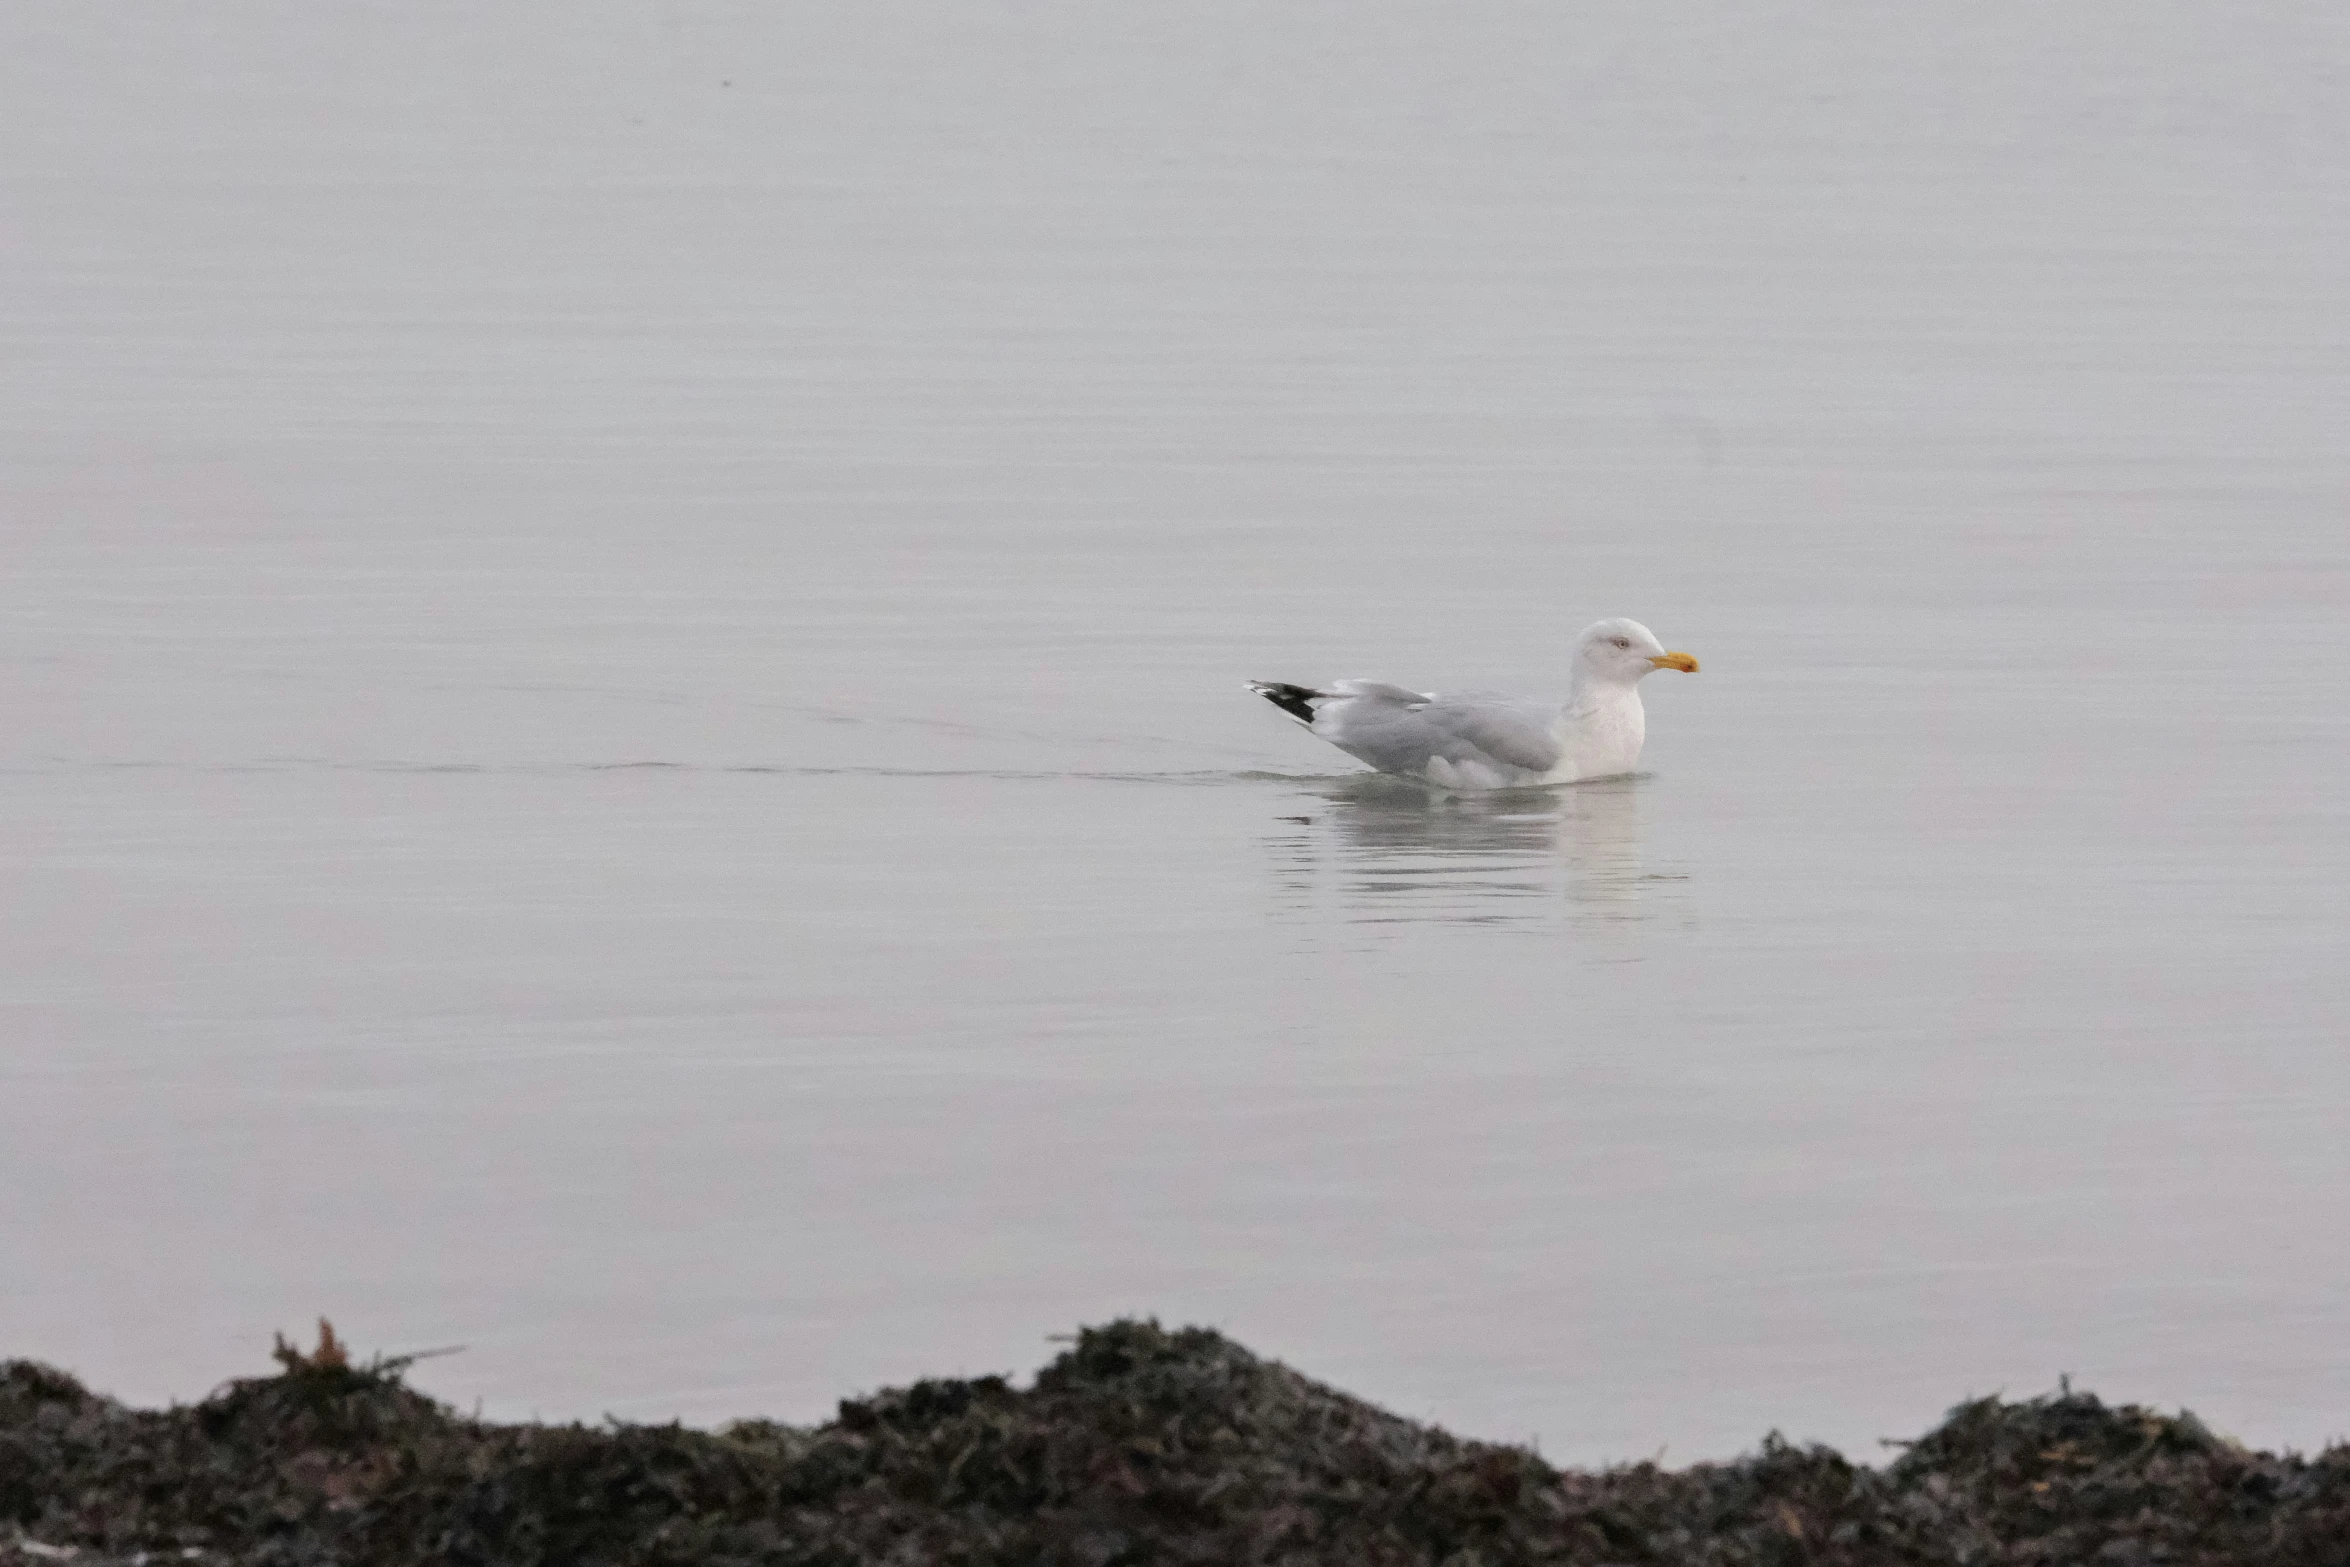 a bird is sitting in the water on a foggy day